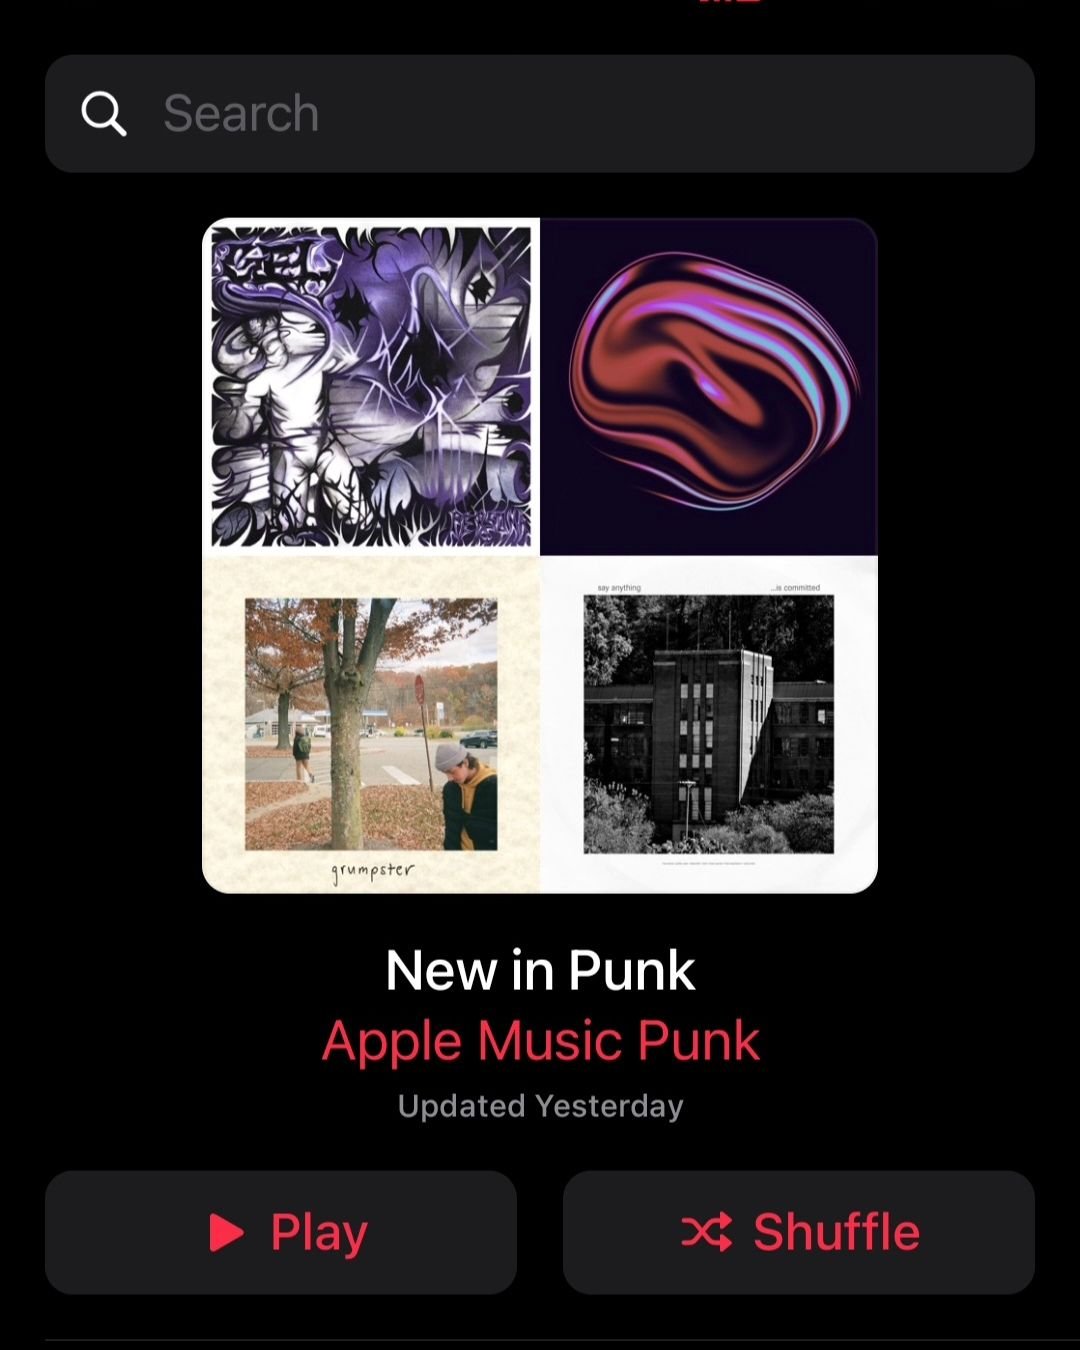 🩸PLAYLIST ADDITION🩸

We are SUPER stoked to announce that our latest single BLACK HOLE has been added to two majorly huge playlists on Apple Music! 👀
New in Punk 👽
Negative Space 🛸

Link to both playlists in our bio!! 🩸

This is certainly a hol